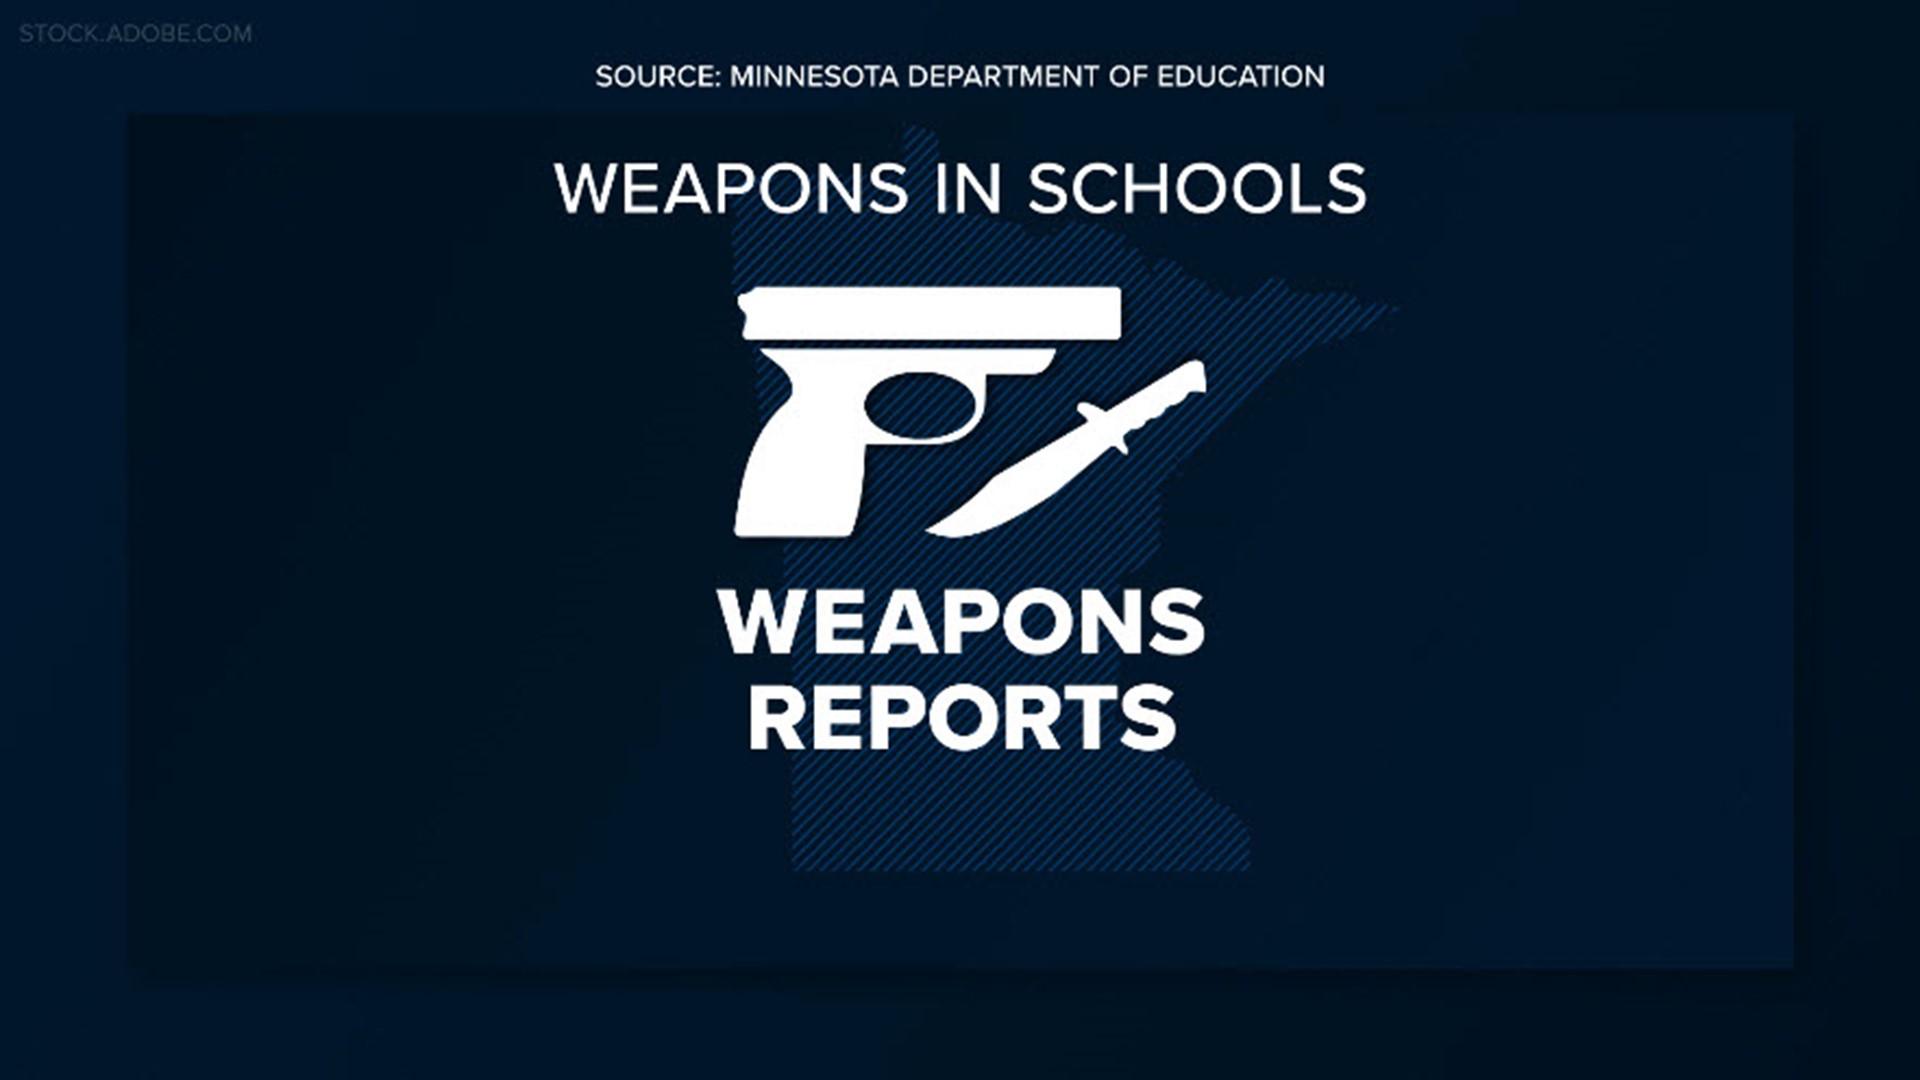 KARE 11 obtained data from the 22-23 school year showing schools had more incidents involving weapons and assaults than the previous year, but fewer gun reports.